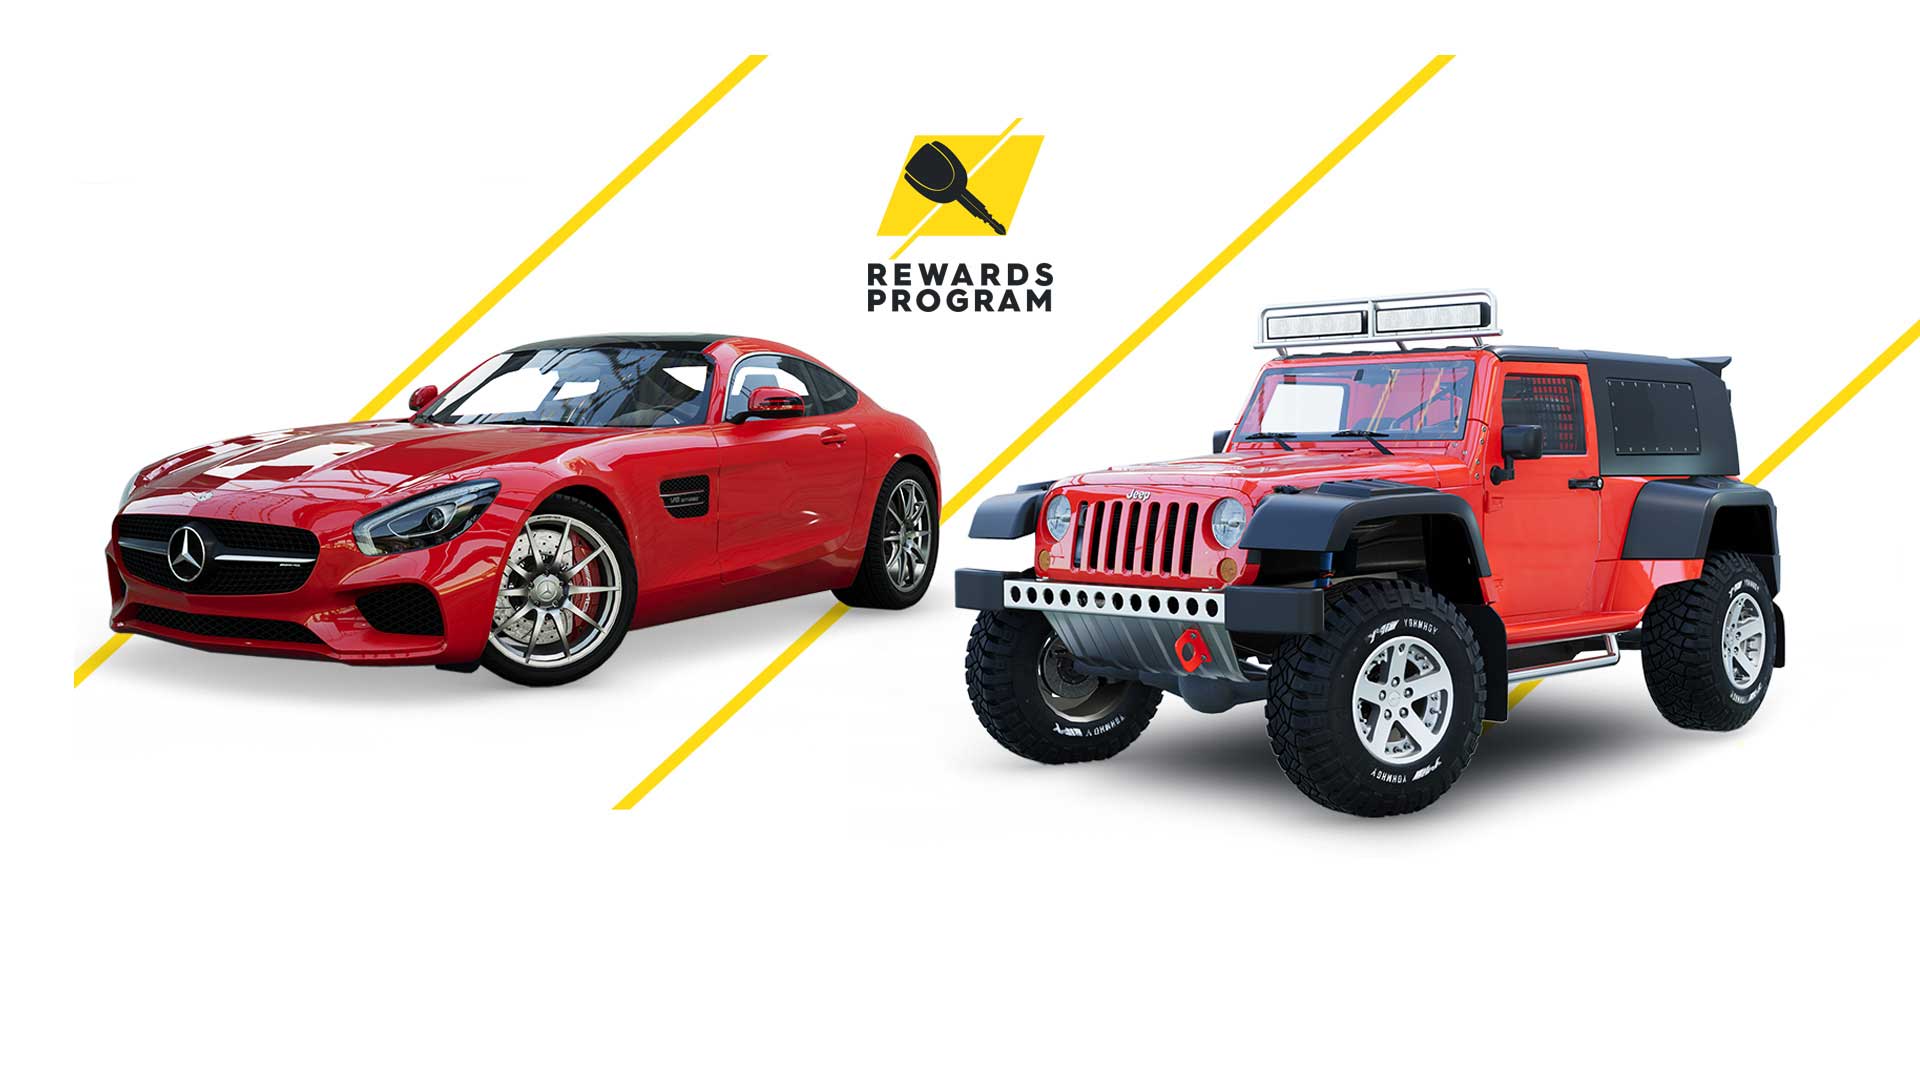 Add the Jeep Wrangler and Mercedes-AMG GT to your garage now!